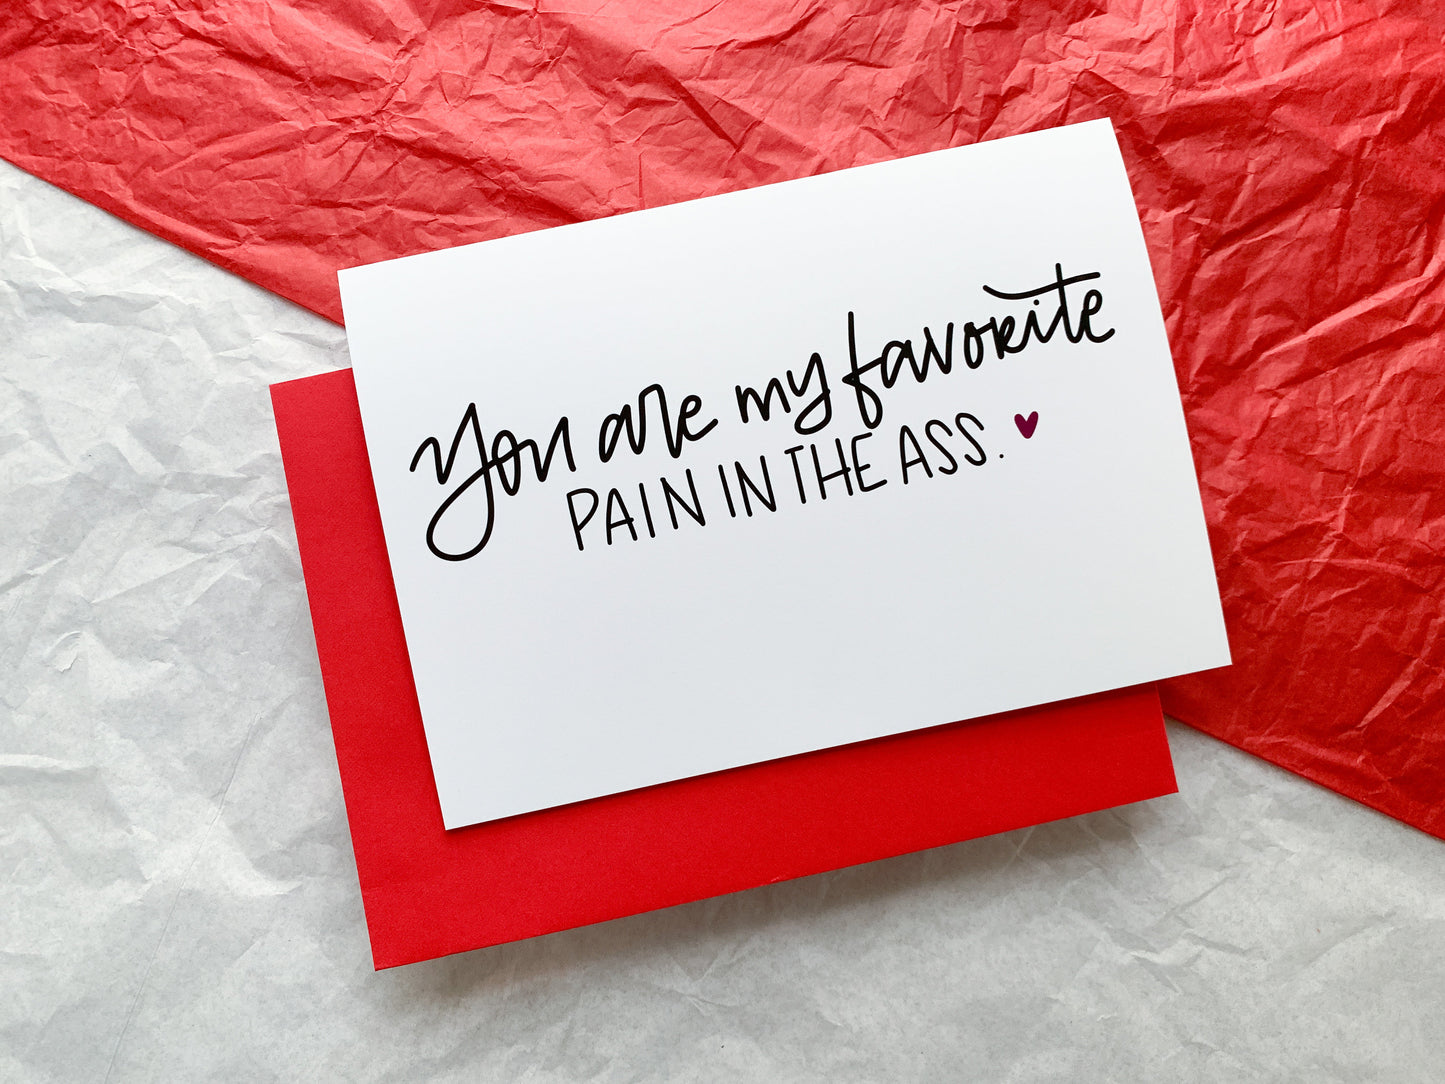 You Are My Favorite Pain in the Ass Snarky Handmade Valentine by StoneDonut Design